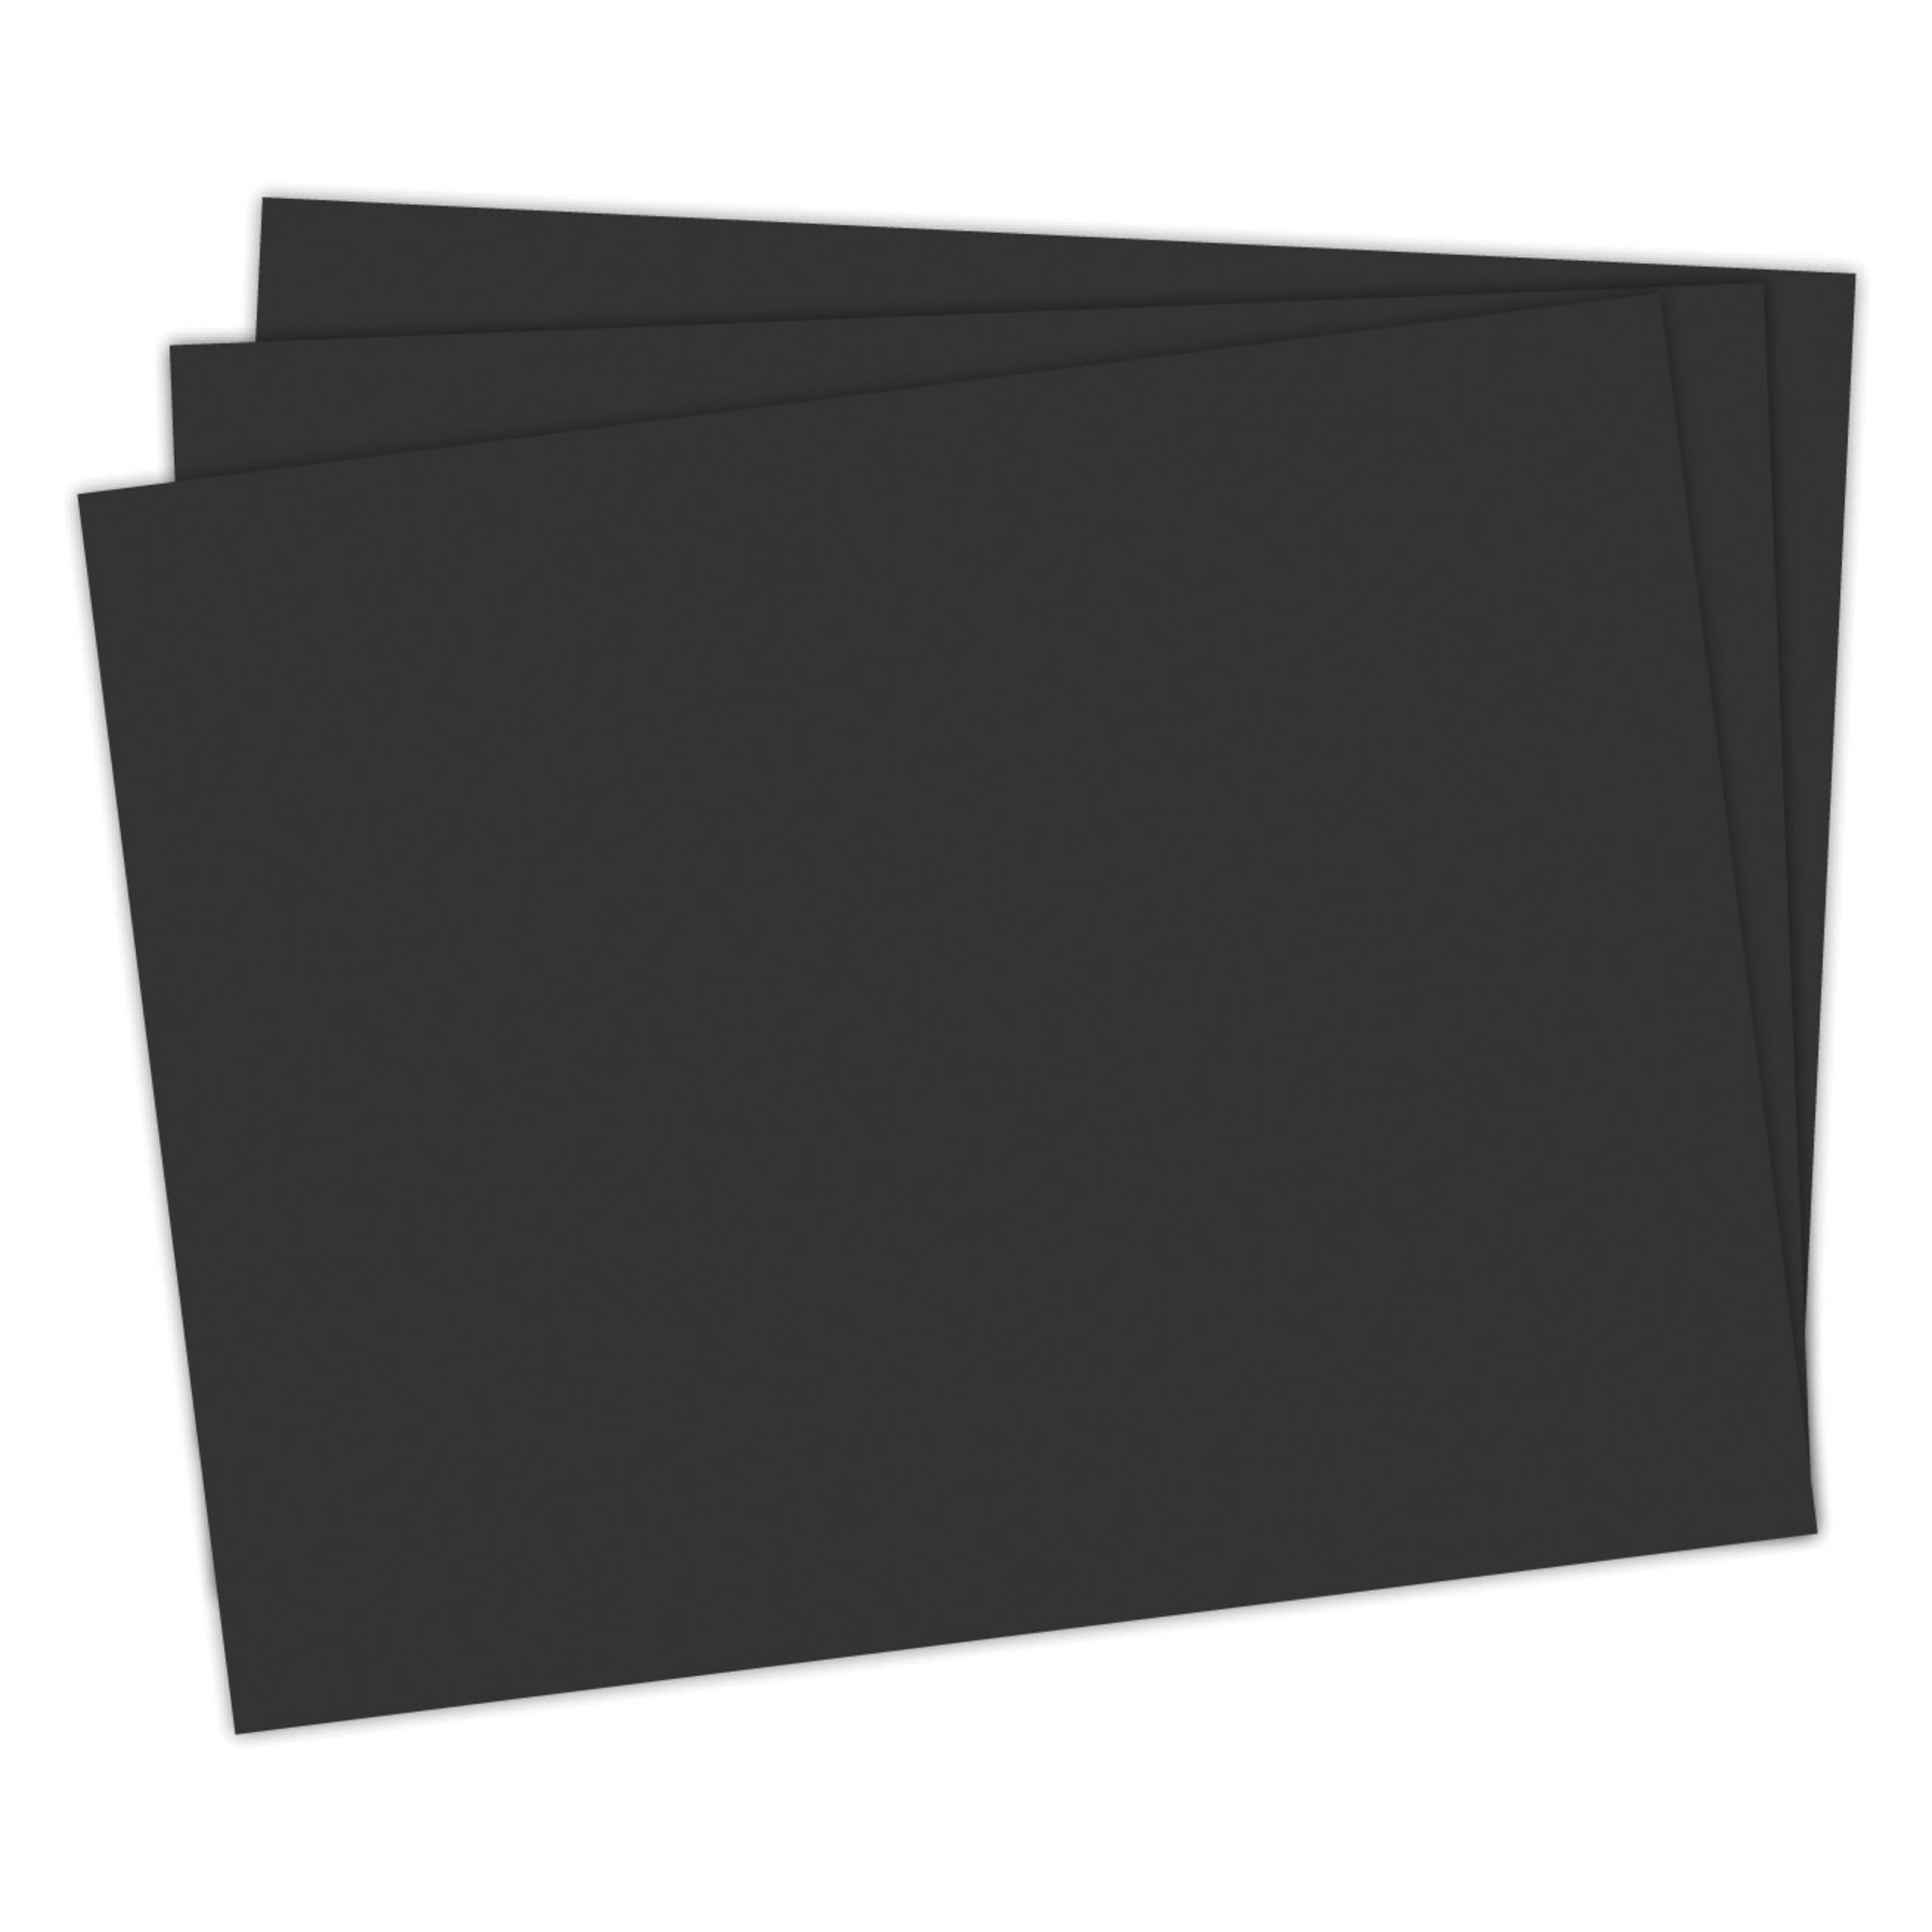 School Smart Railroad Board, 22 x 28 Inches, 4-Ply, Black, Pack of 25 